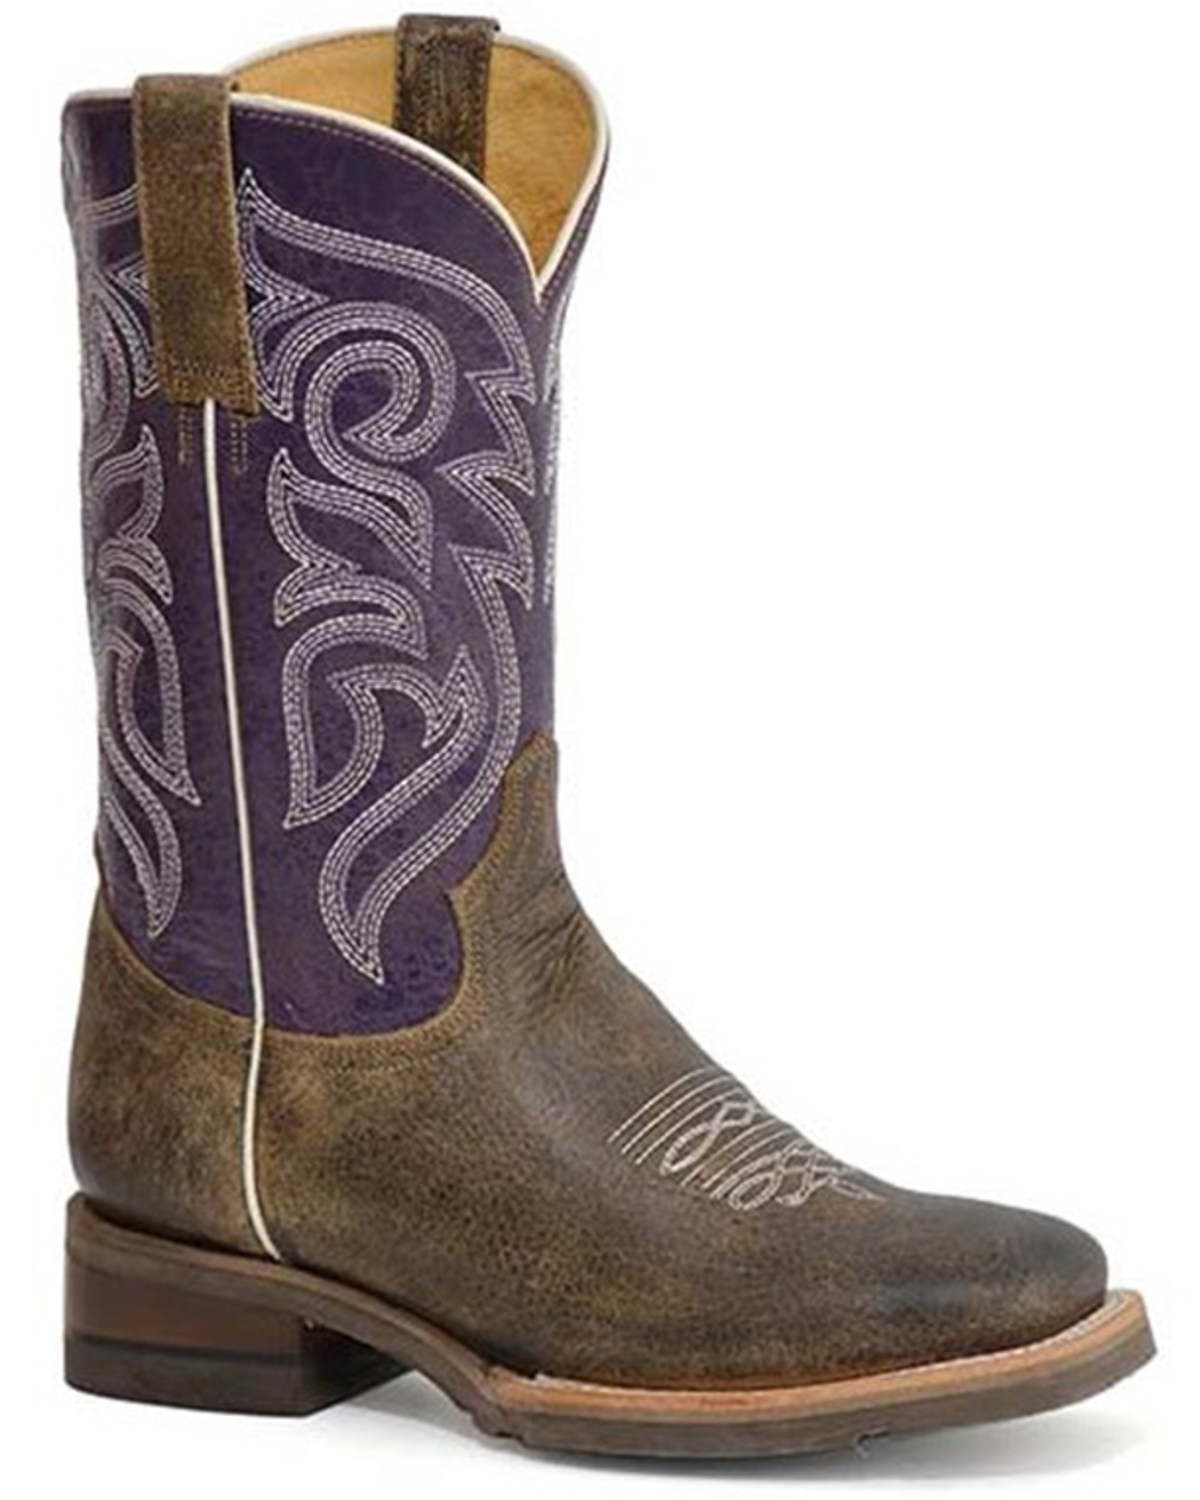 Roper Women's Lady Western Boots - Broad Square Toe